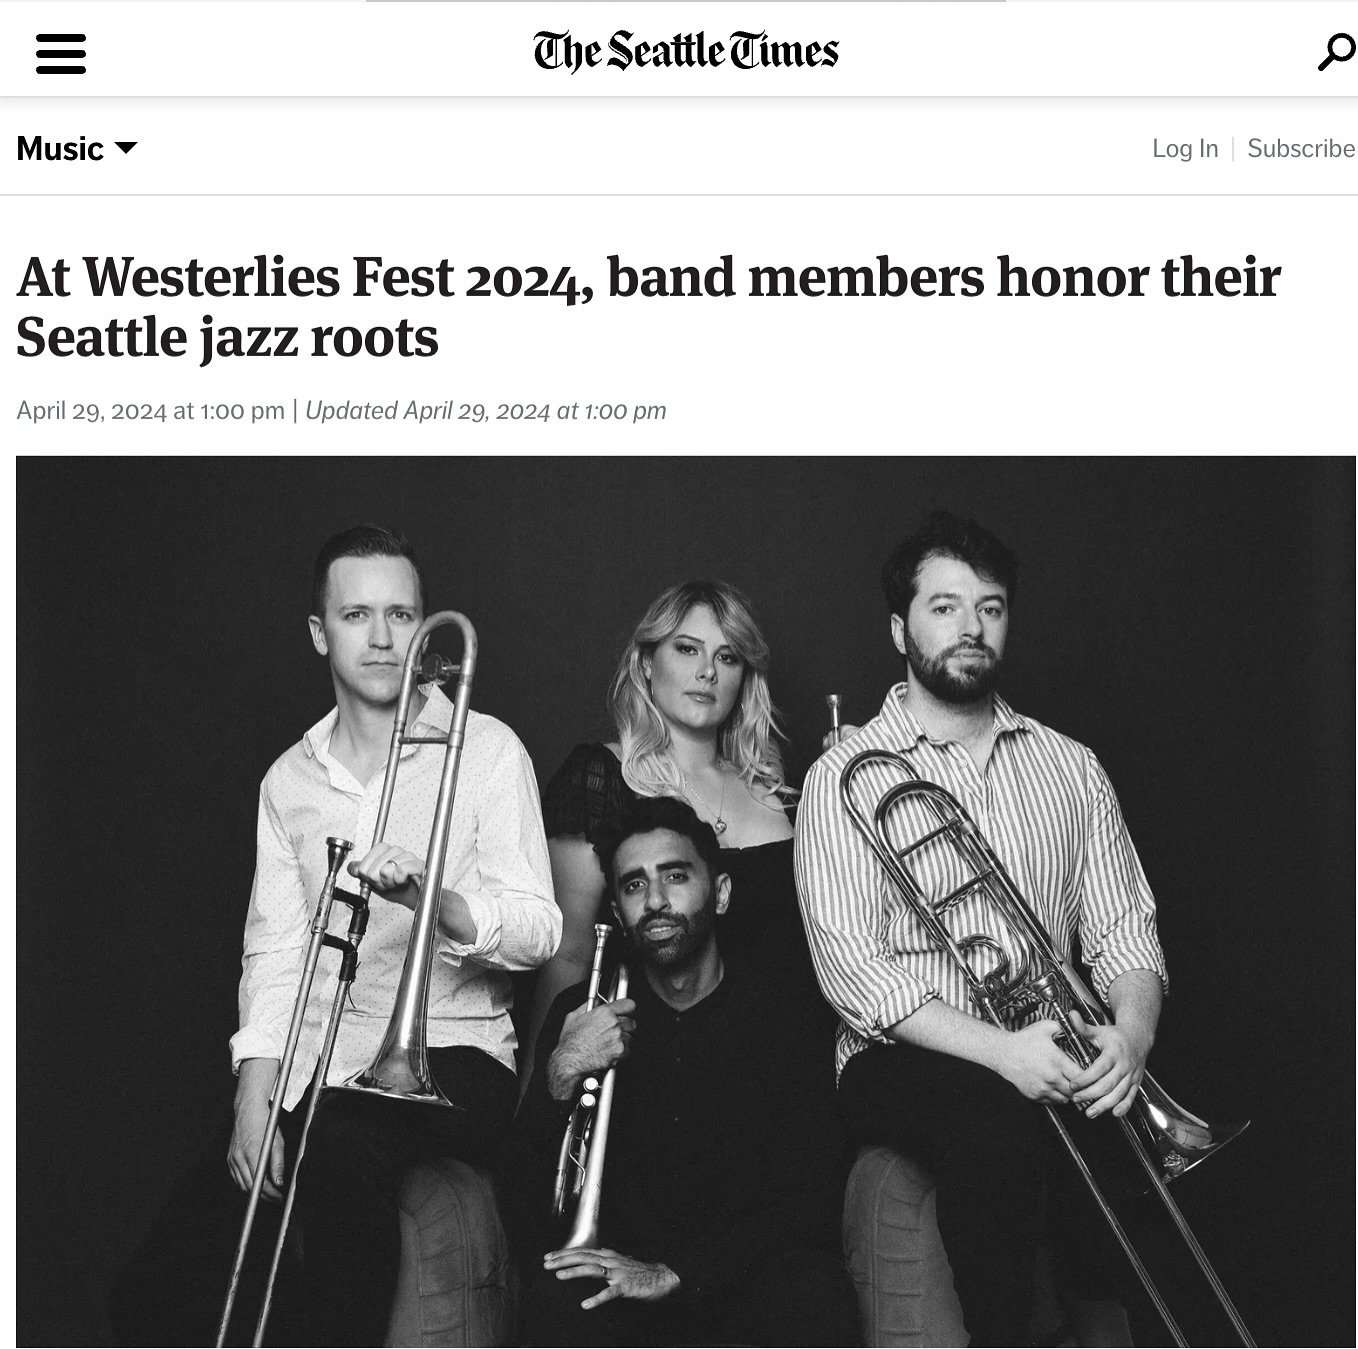 &ldquo;They&rsquo;ll manifest their hometown love this spring during Westerlies Fest 2024, a weeklong educational outreach program culminating in shows across the city May 9-11.&rdquo;

Huge thanks to Eric Olson and @seattletimes for spreading the wo